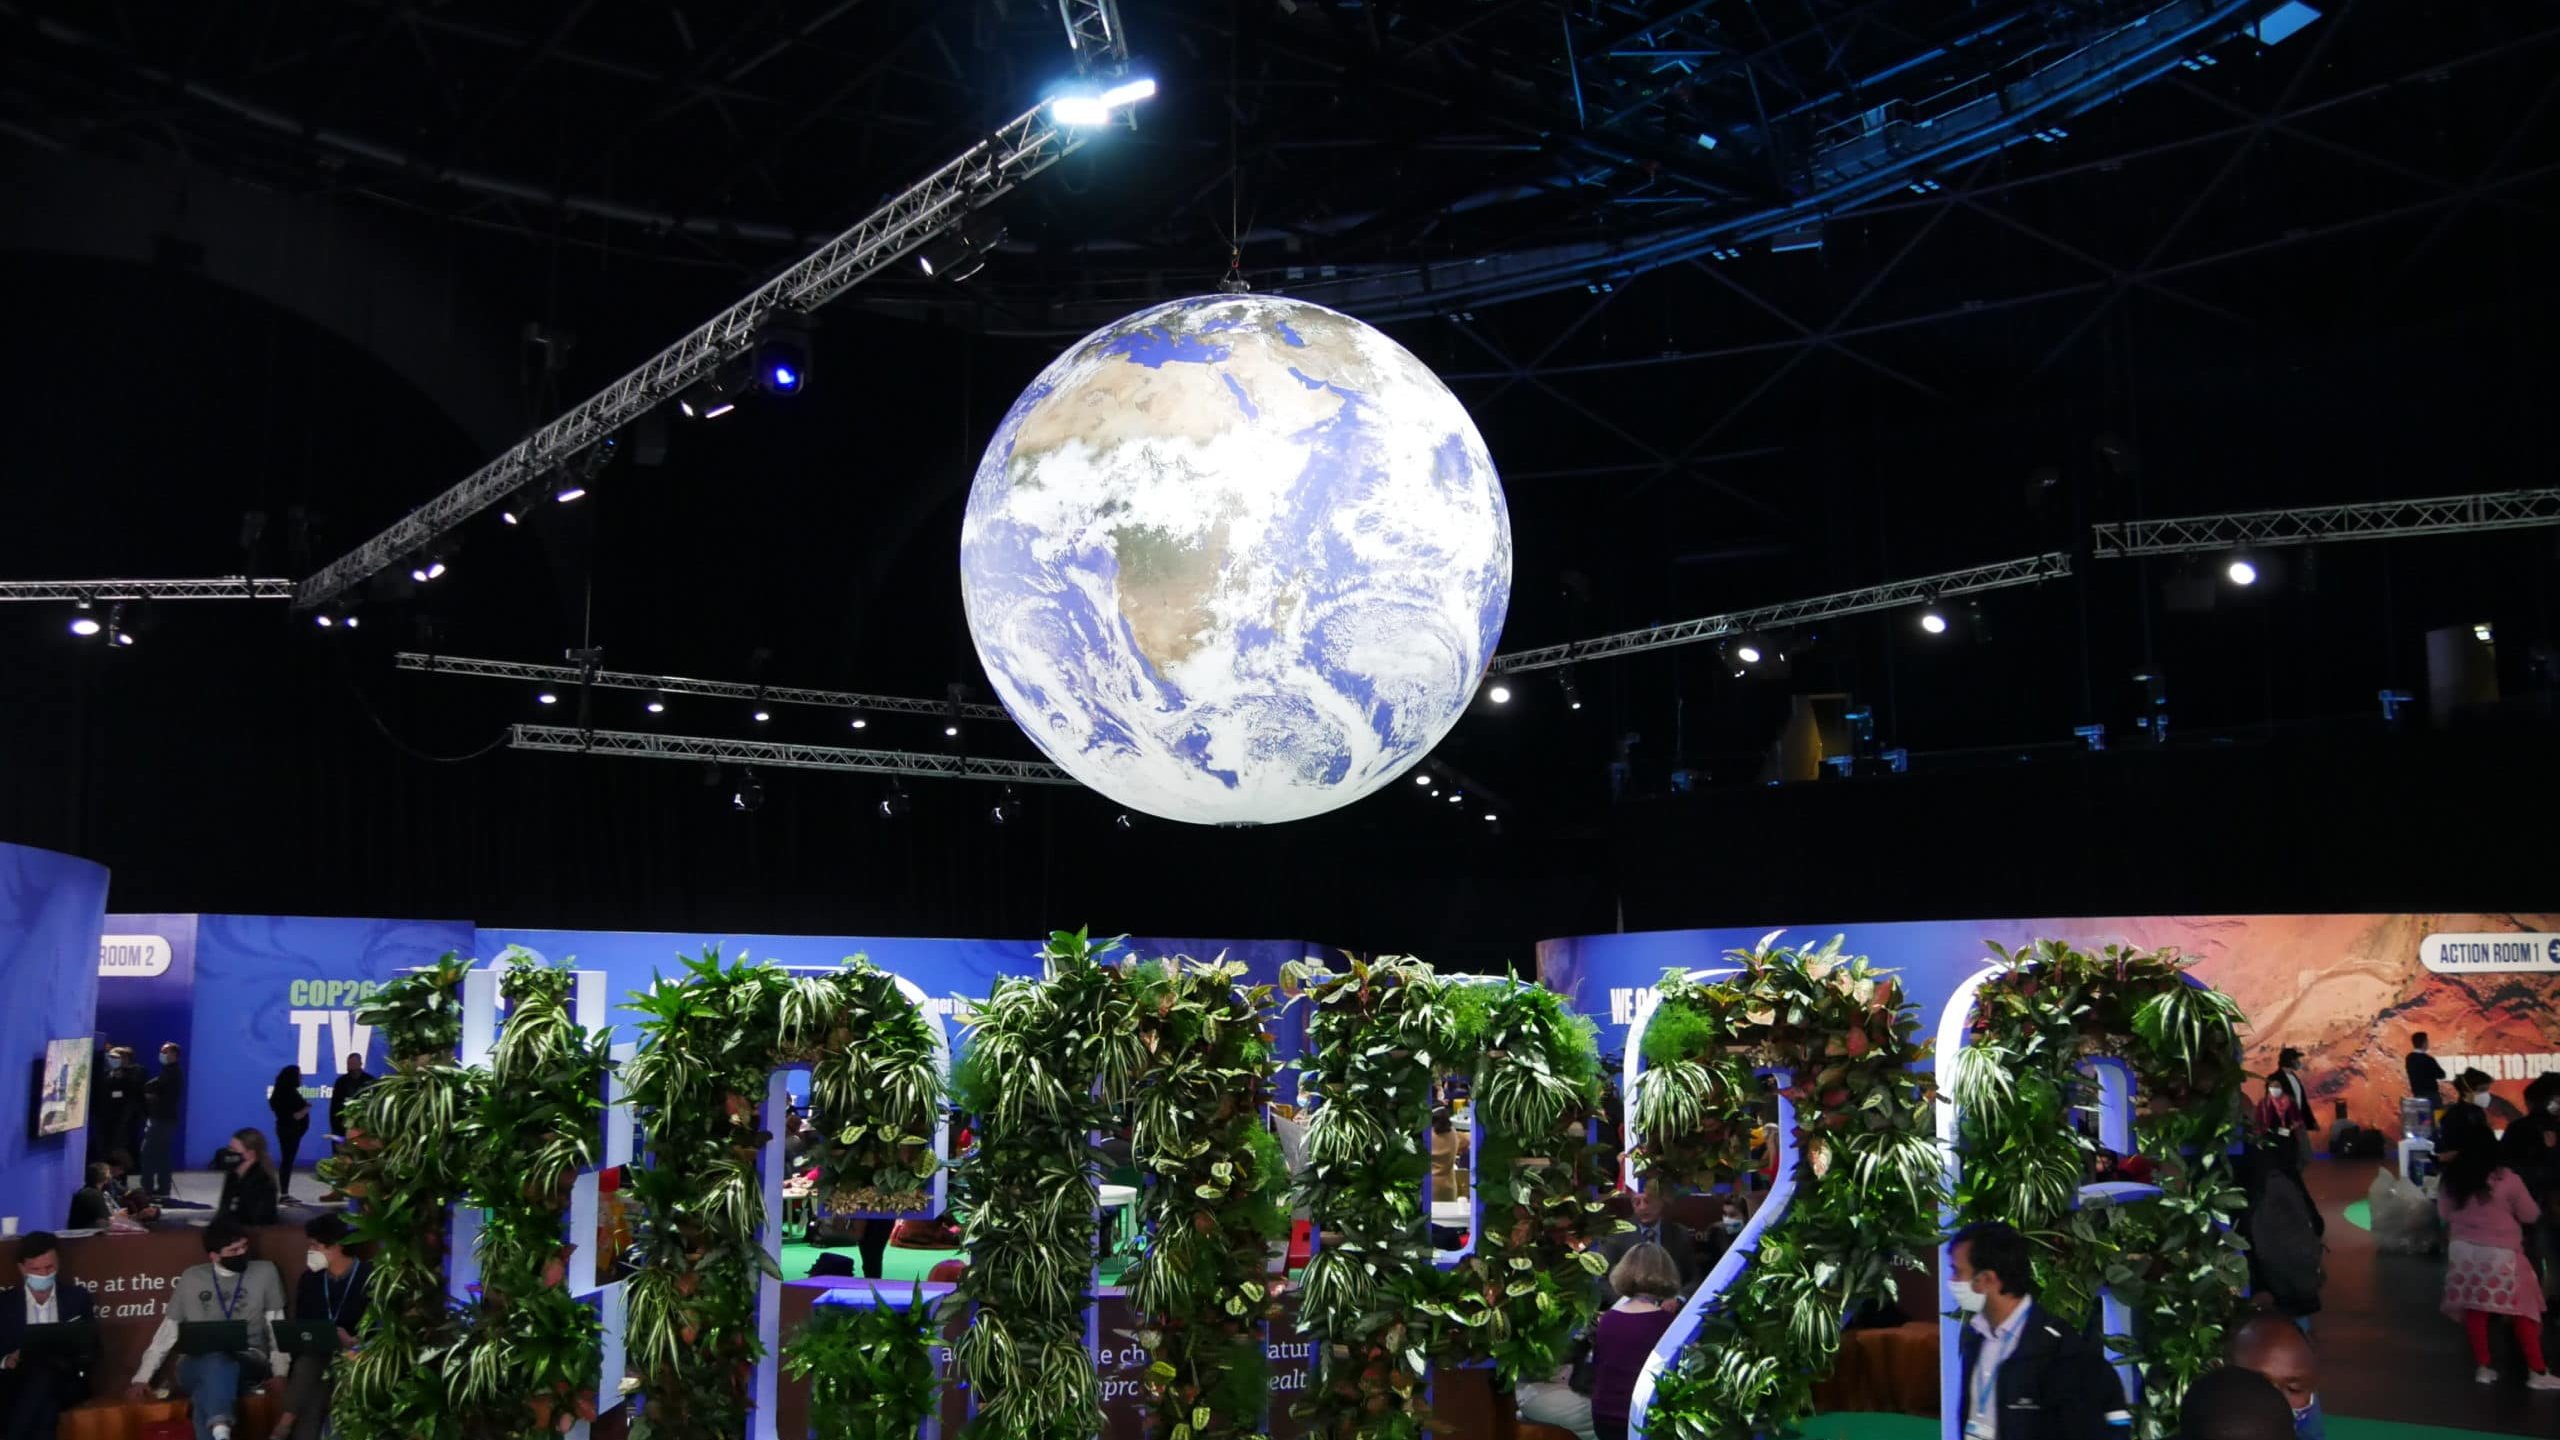 COP26 writing from plants above globe